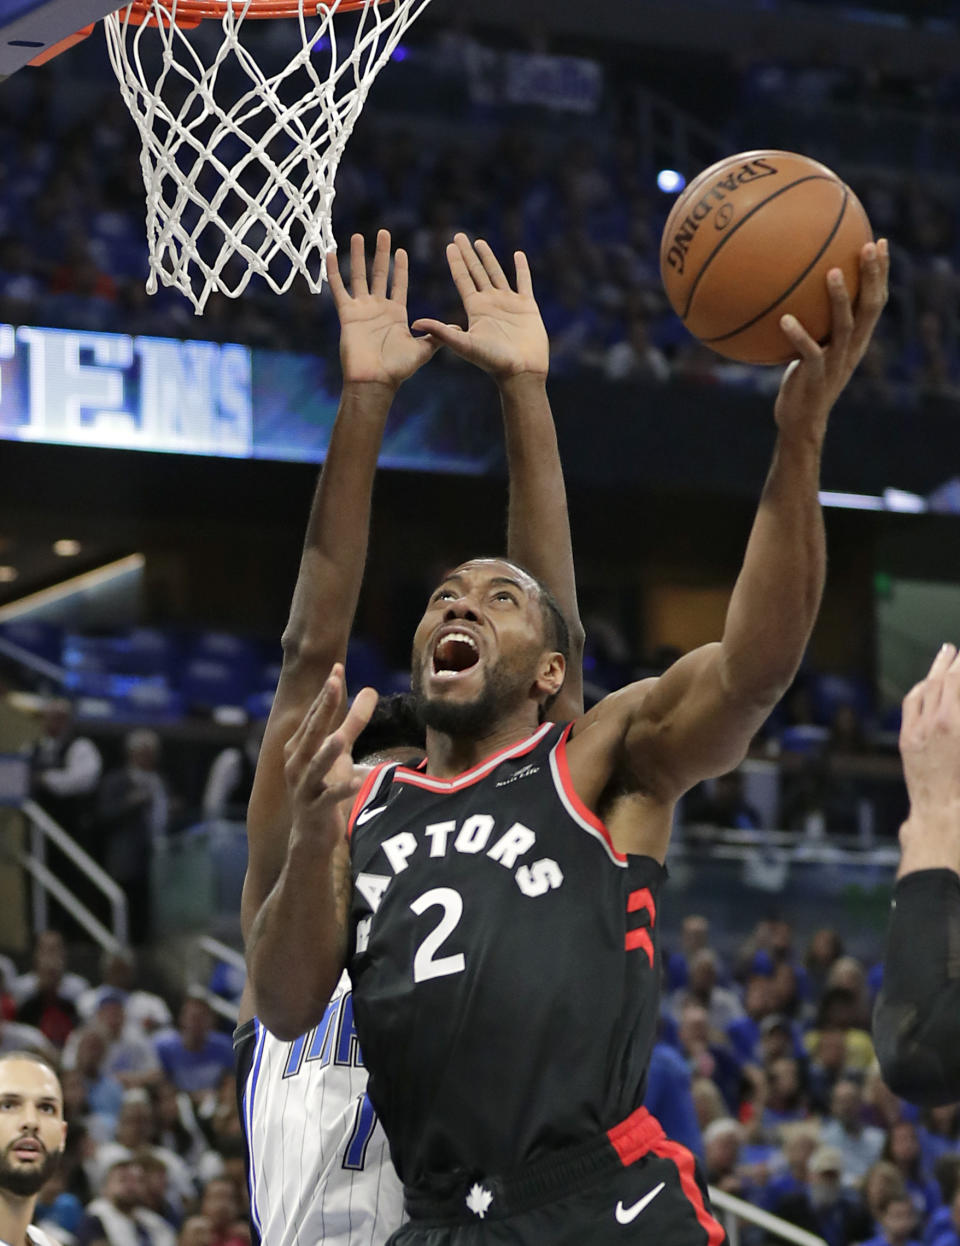 Toronto Raptors' Kawhi Leonard (2) makes a shot in front of Orlando Magic's Jonathan Isaac during the first half in Game 4 of a first-round NBA basketball playoff series, Sunday, April 21, 2019, in Orlando, Fla. (AP Photo/John Raoux)